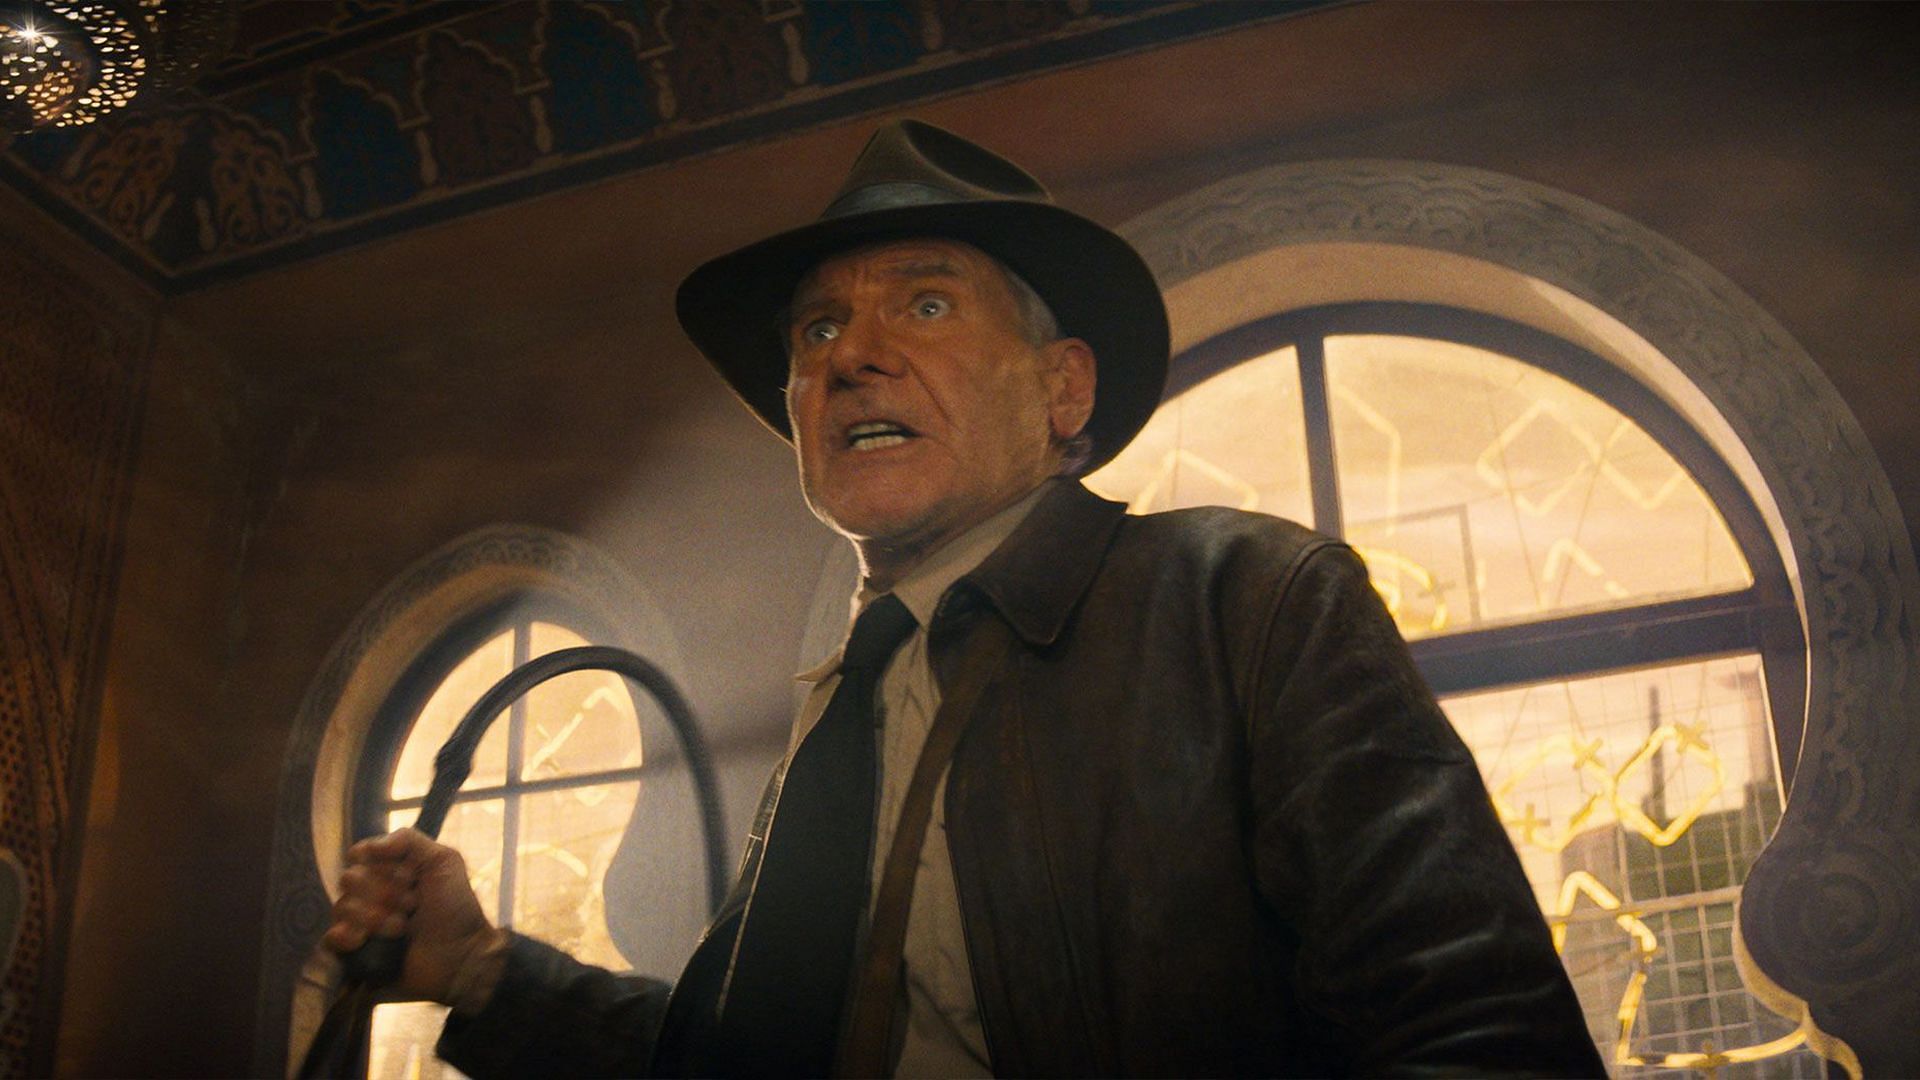 Harrison Ford in Indiana Jones and the Dial of Destiny (Image via Disney)